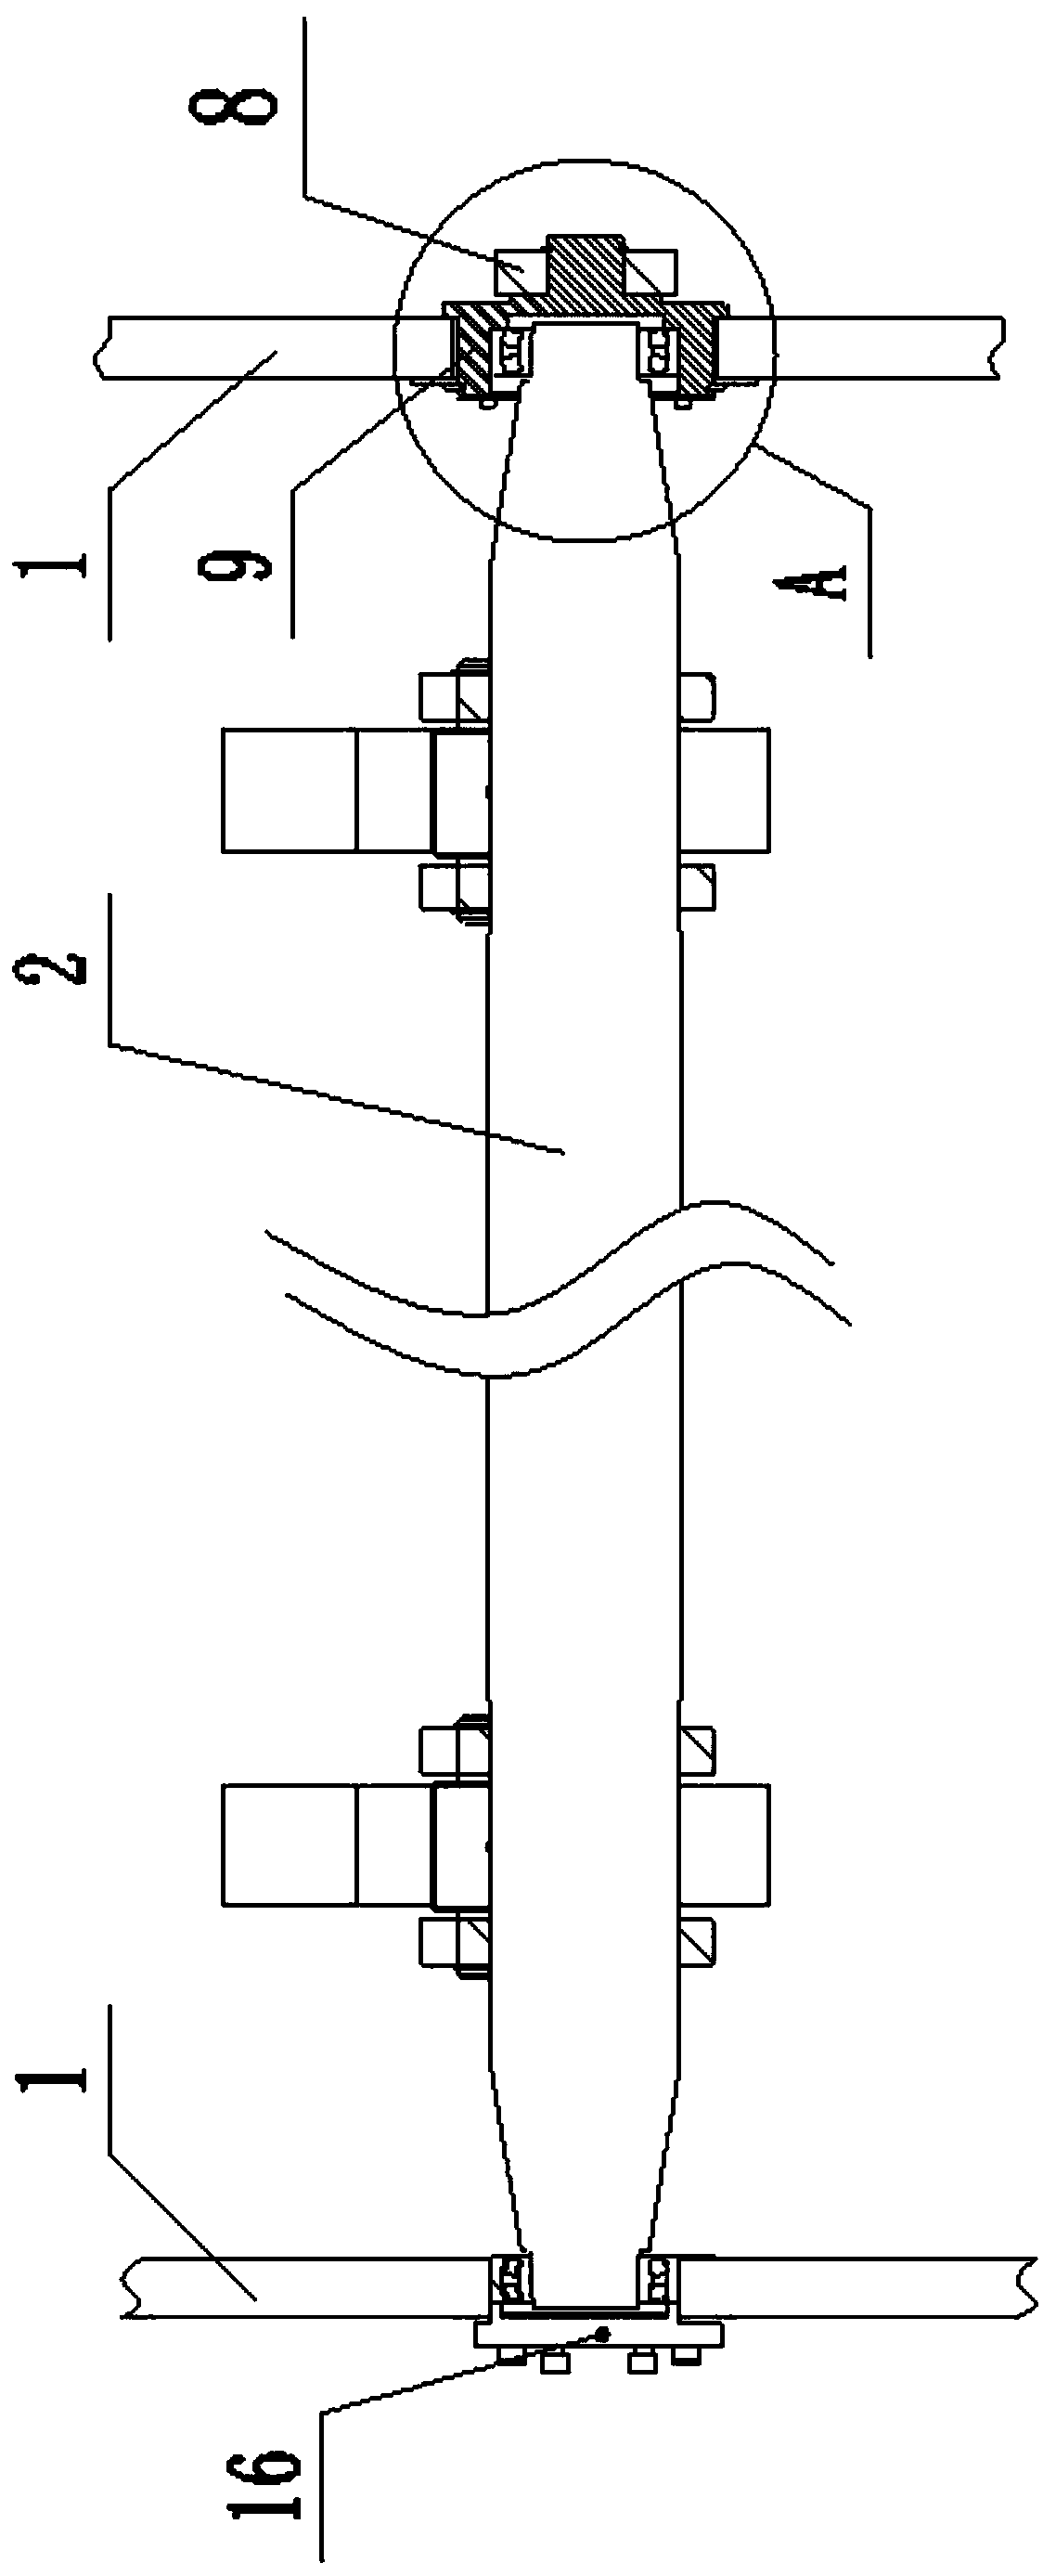 An electric balance adjustment device for a bending machine